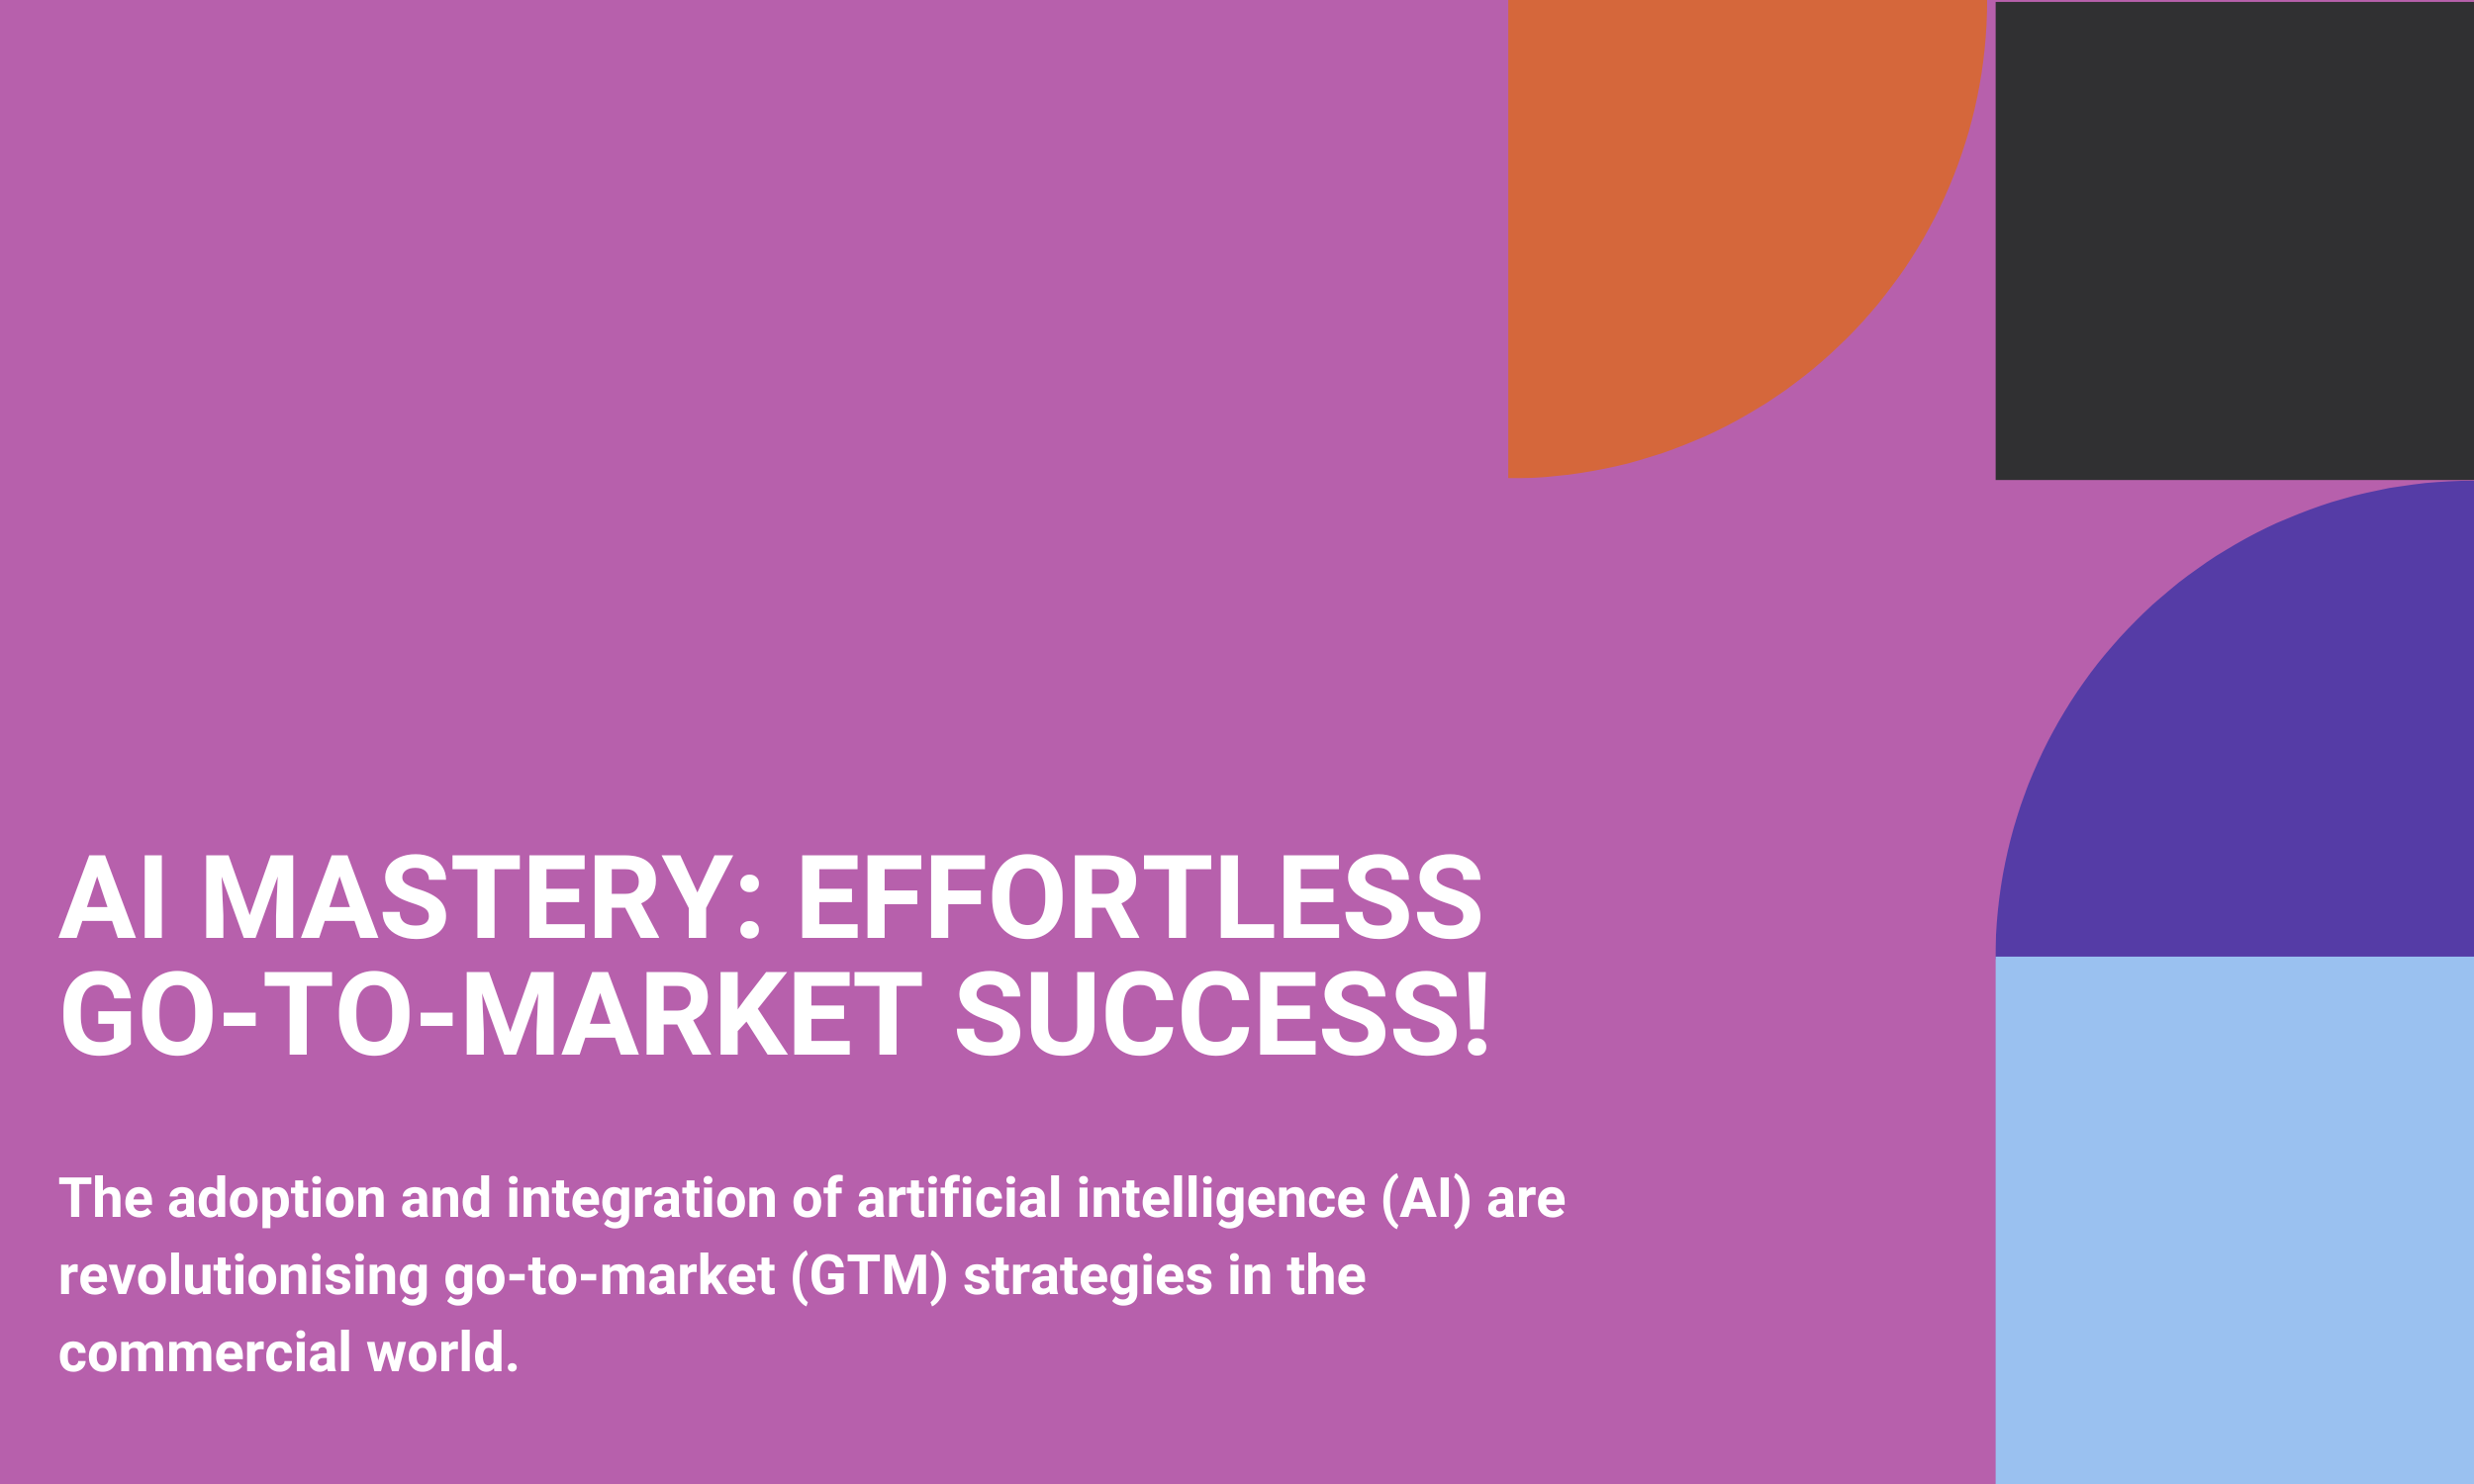 AI Mastery: Effortless Go-To-Market Success!